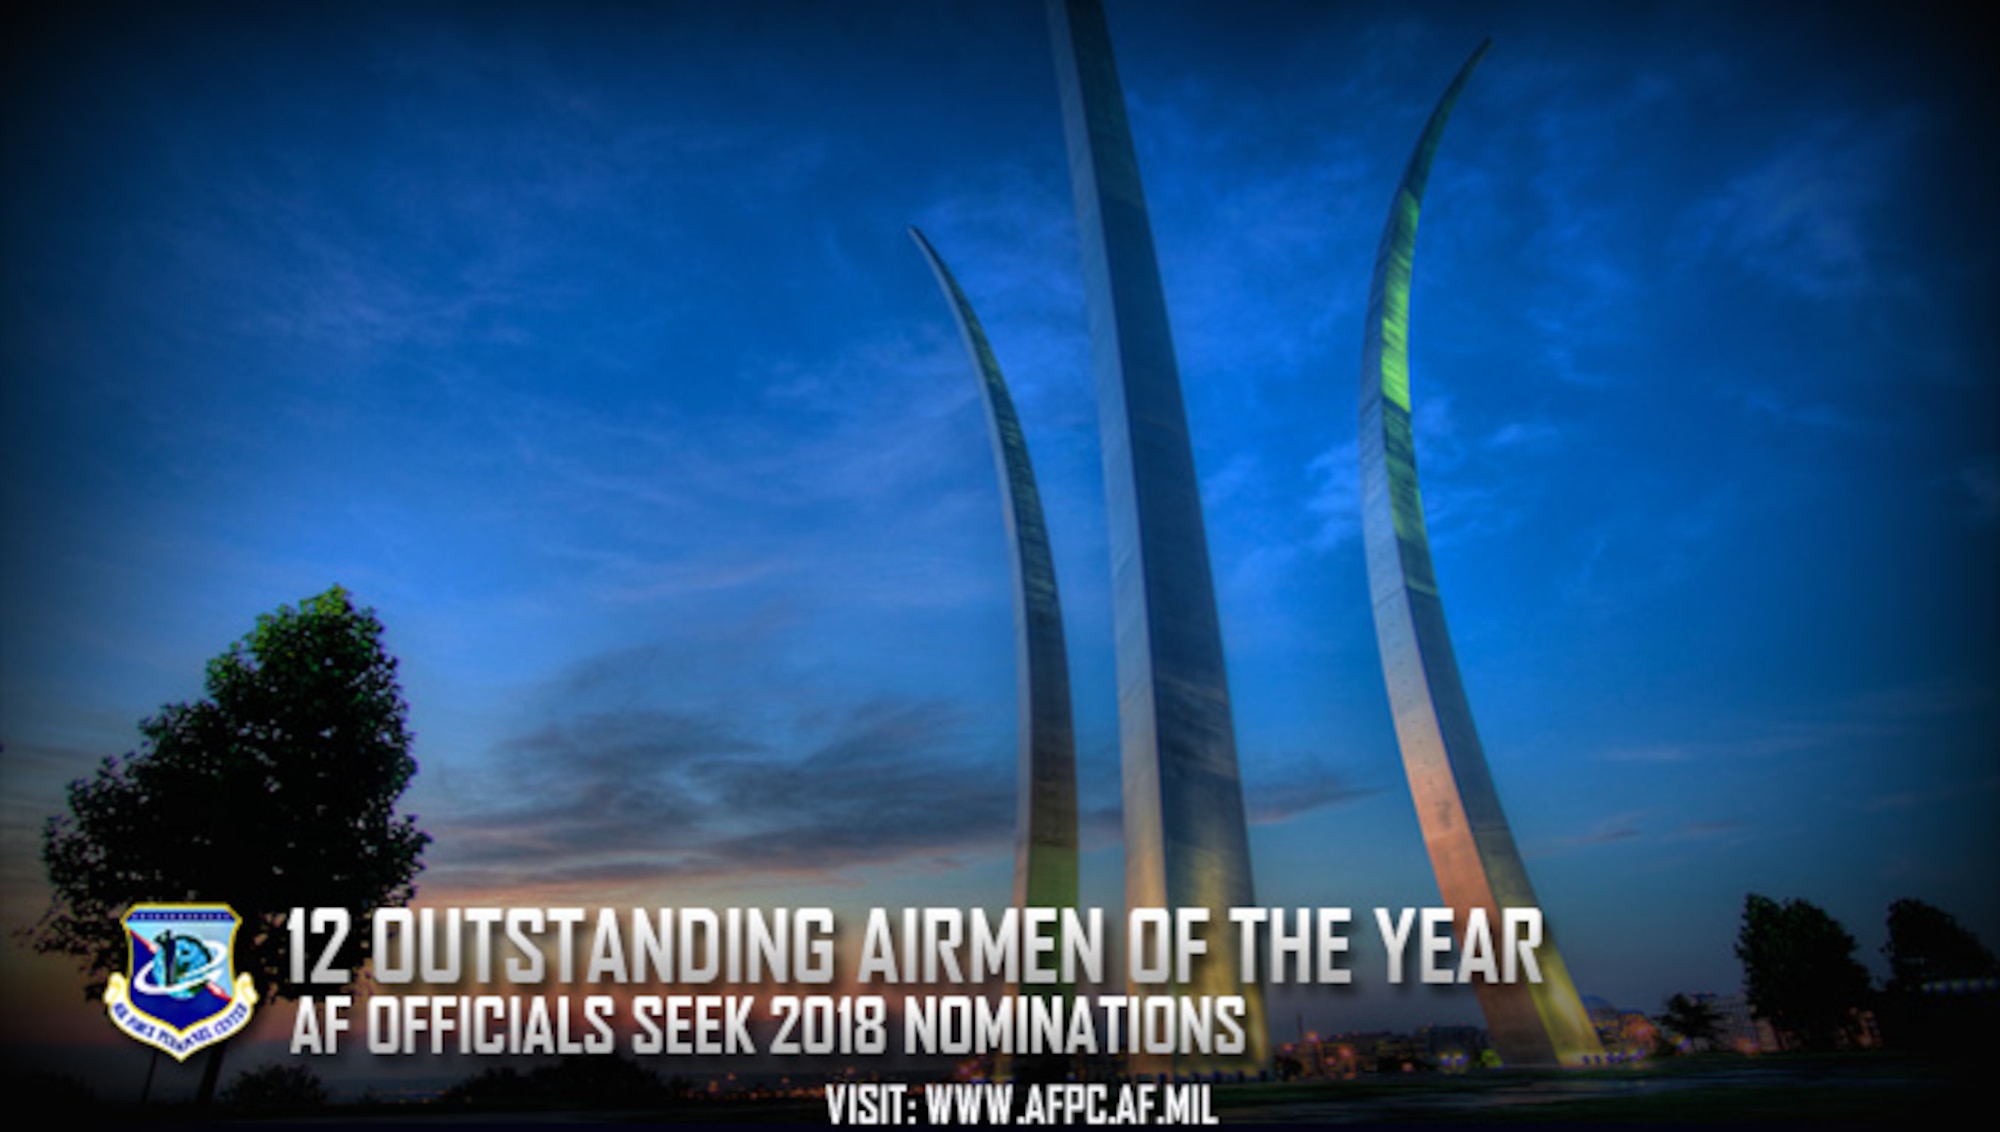 Air Force officials are seeking 2018 nominations for the 12 Outstanding Airmen of the Year Award. Nominations are due to the Air Force’s Personnel Center by April 4. (U.S. Air Force courtesy photo)